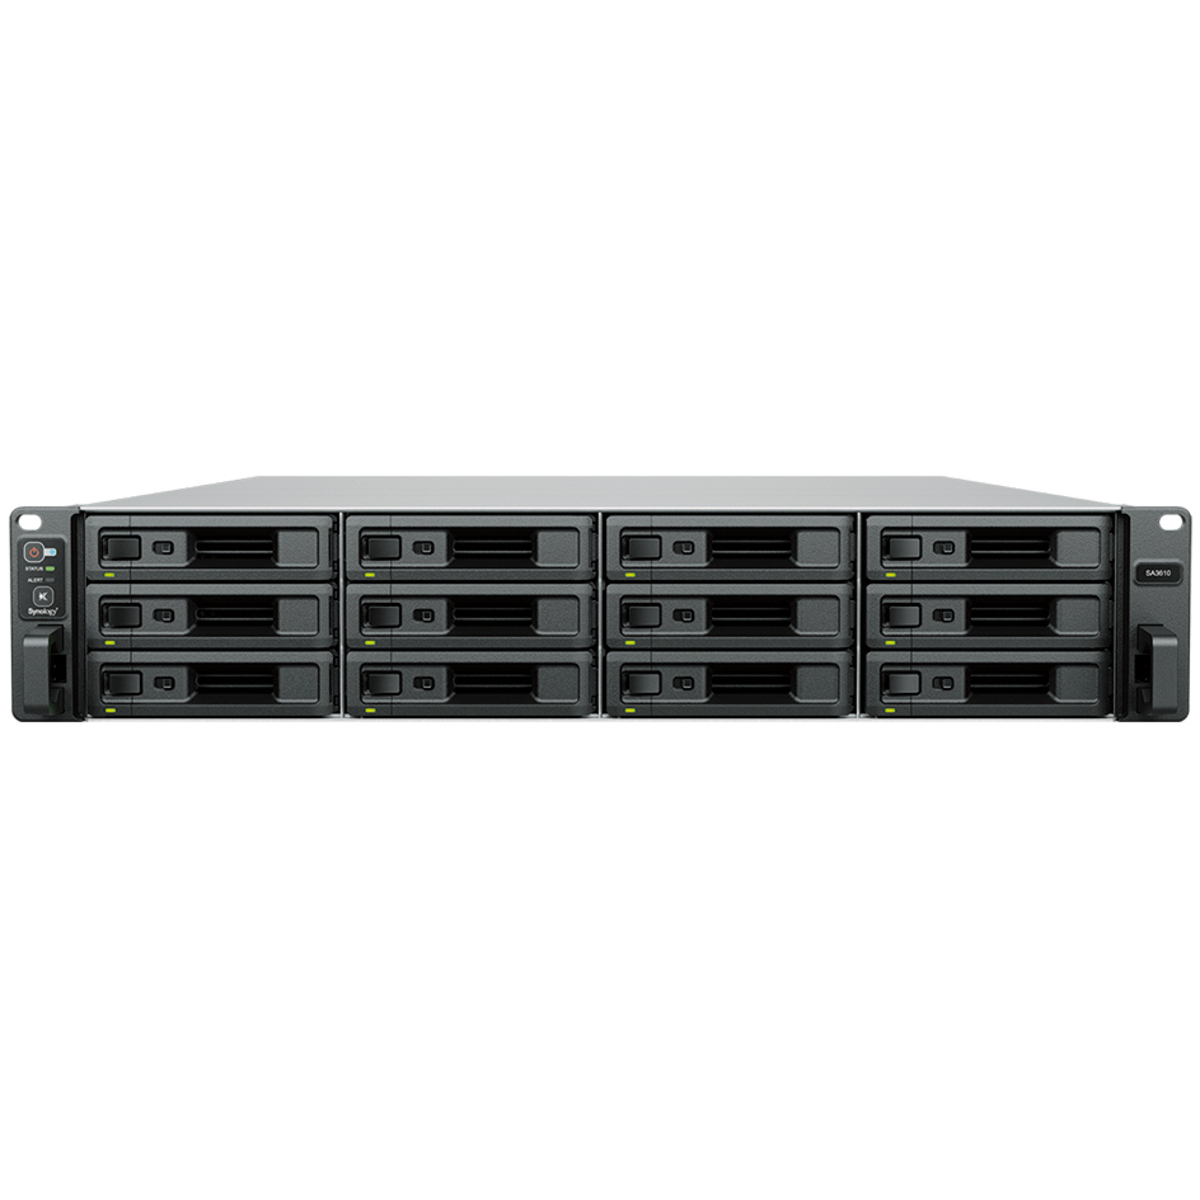 Synology RackStation SA3610 168tb 12-Bay RackMount Large Business / Enterprise NAS - Network Attached Storage Device 7x24tb Seagate IronWolf Pro ST24000NT002 3.5 7200rpm SATA 6Gb/s HDD NAS Class Drives Installed - Burn-In Tested RackStation SA3610